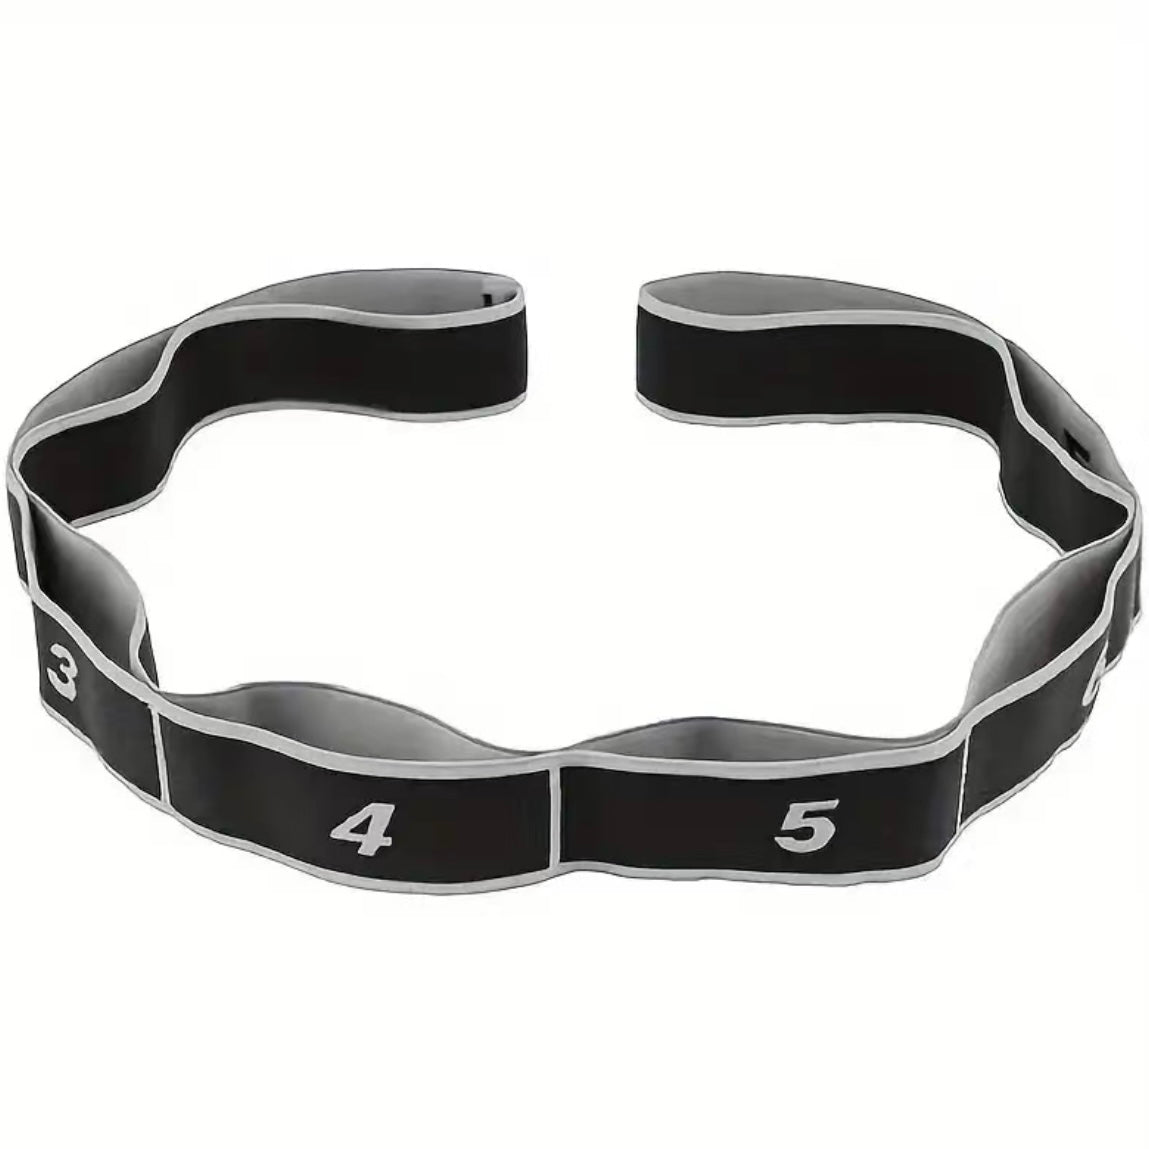 Numbered Resistance/ Stretch Band